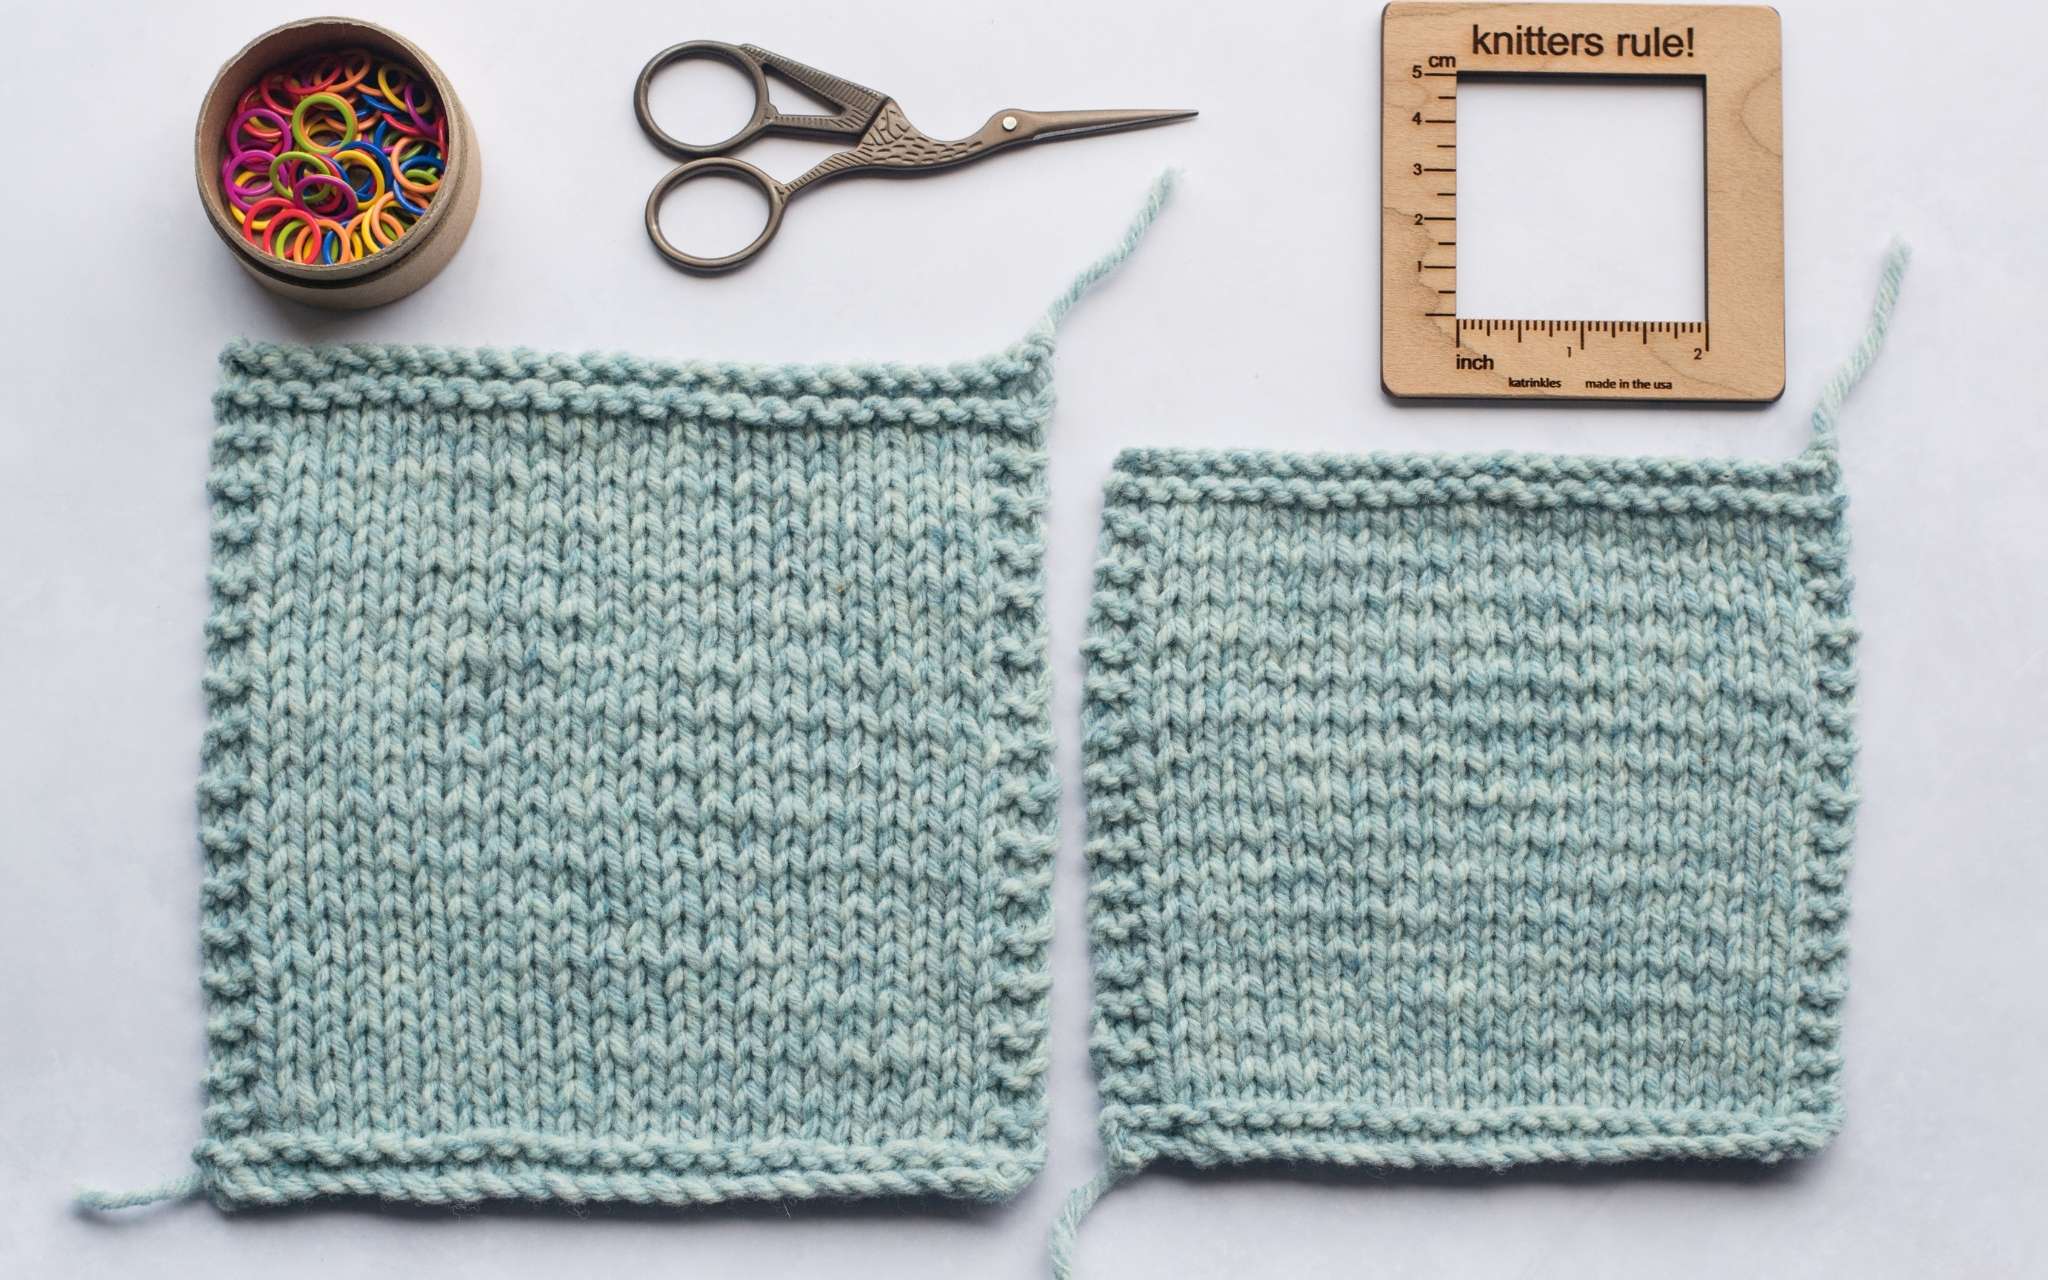 Two pale blue swatches lie on a flat surface. The left swatch is bigger and knit at a looser tension, the right swatch is smaller and a denser fabric. Above the swatches are a pot of brightly coloured stitch markers, a small pair of scissors and a wooden square measuring tool.